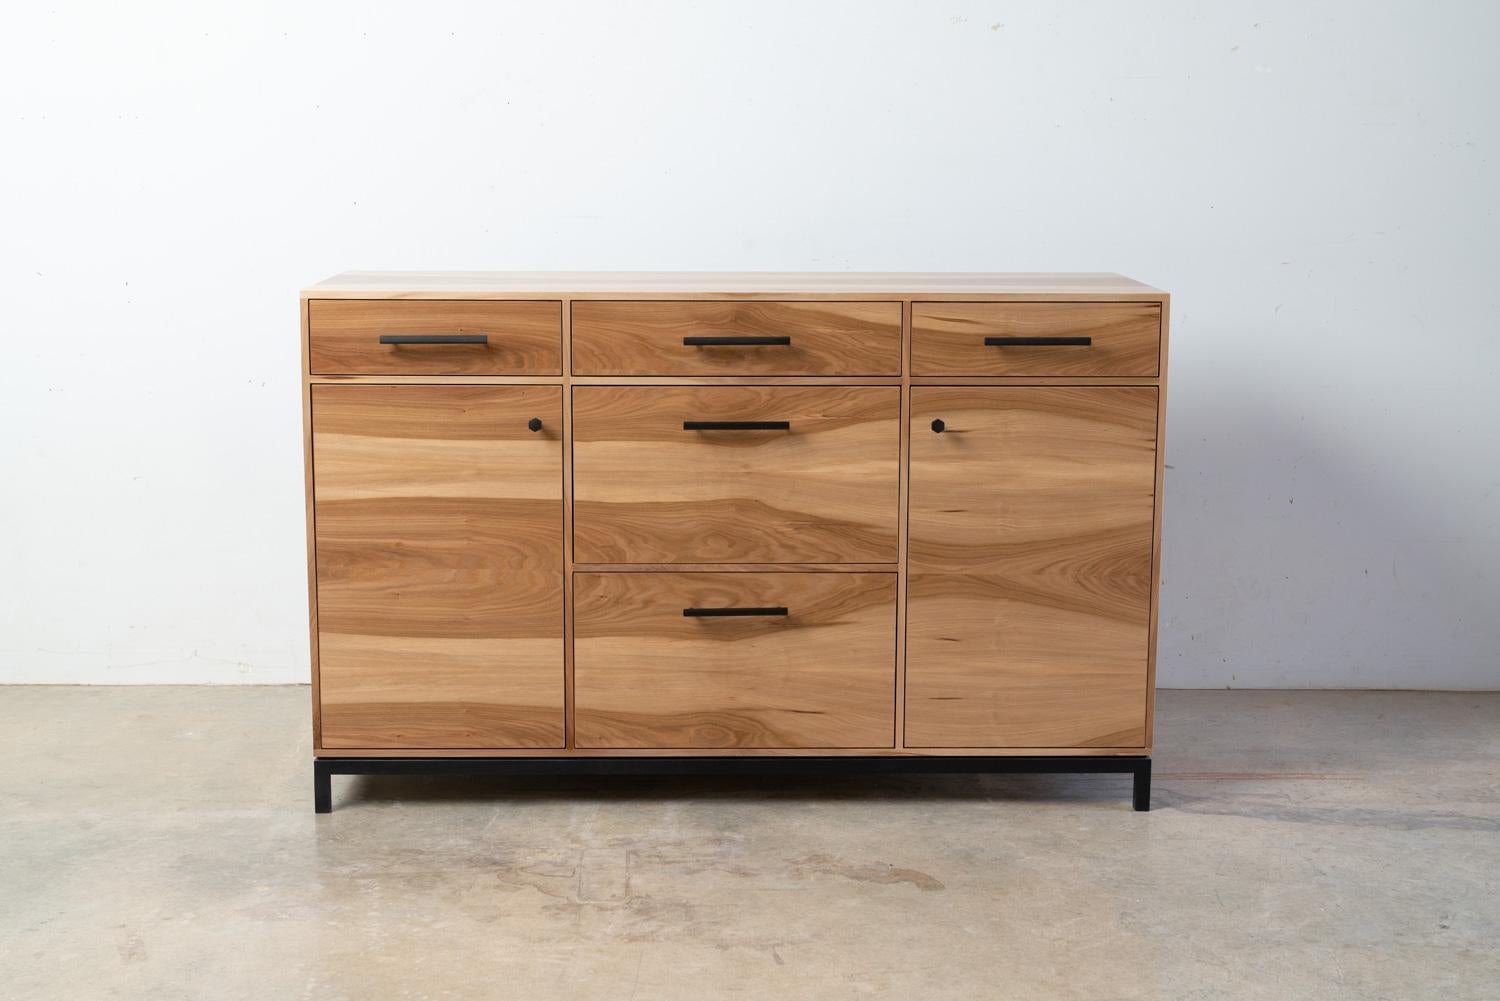 The Lanett credenza is handcrafted and unique in every way. The elegance of this modern style credenza strikes from the first moment with intricate veneer work showcasing the enigmatic grain patterns of urban timber. Unique species like sweet gum